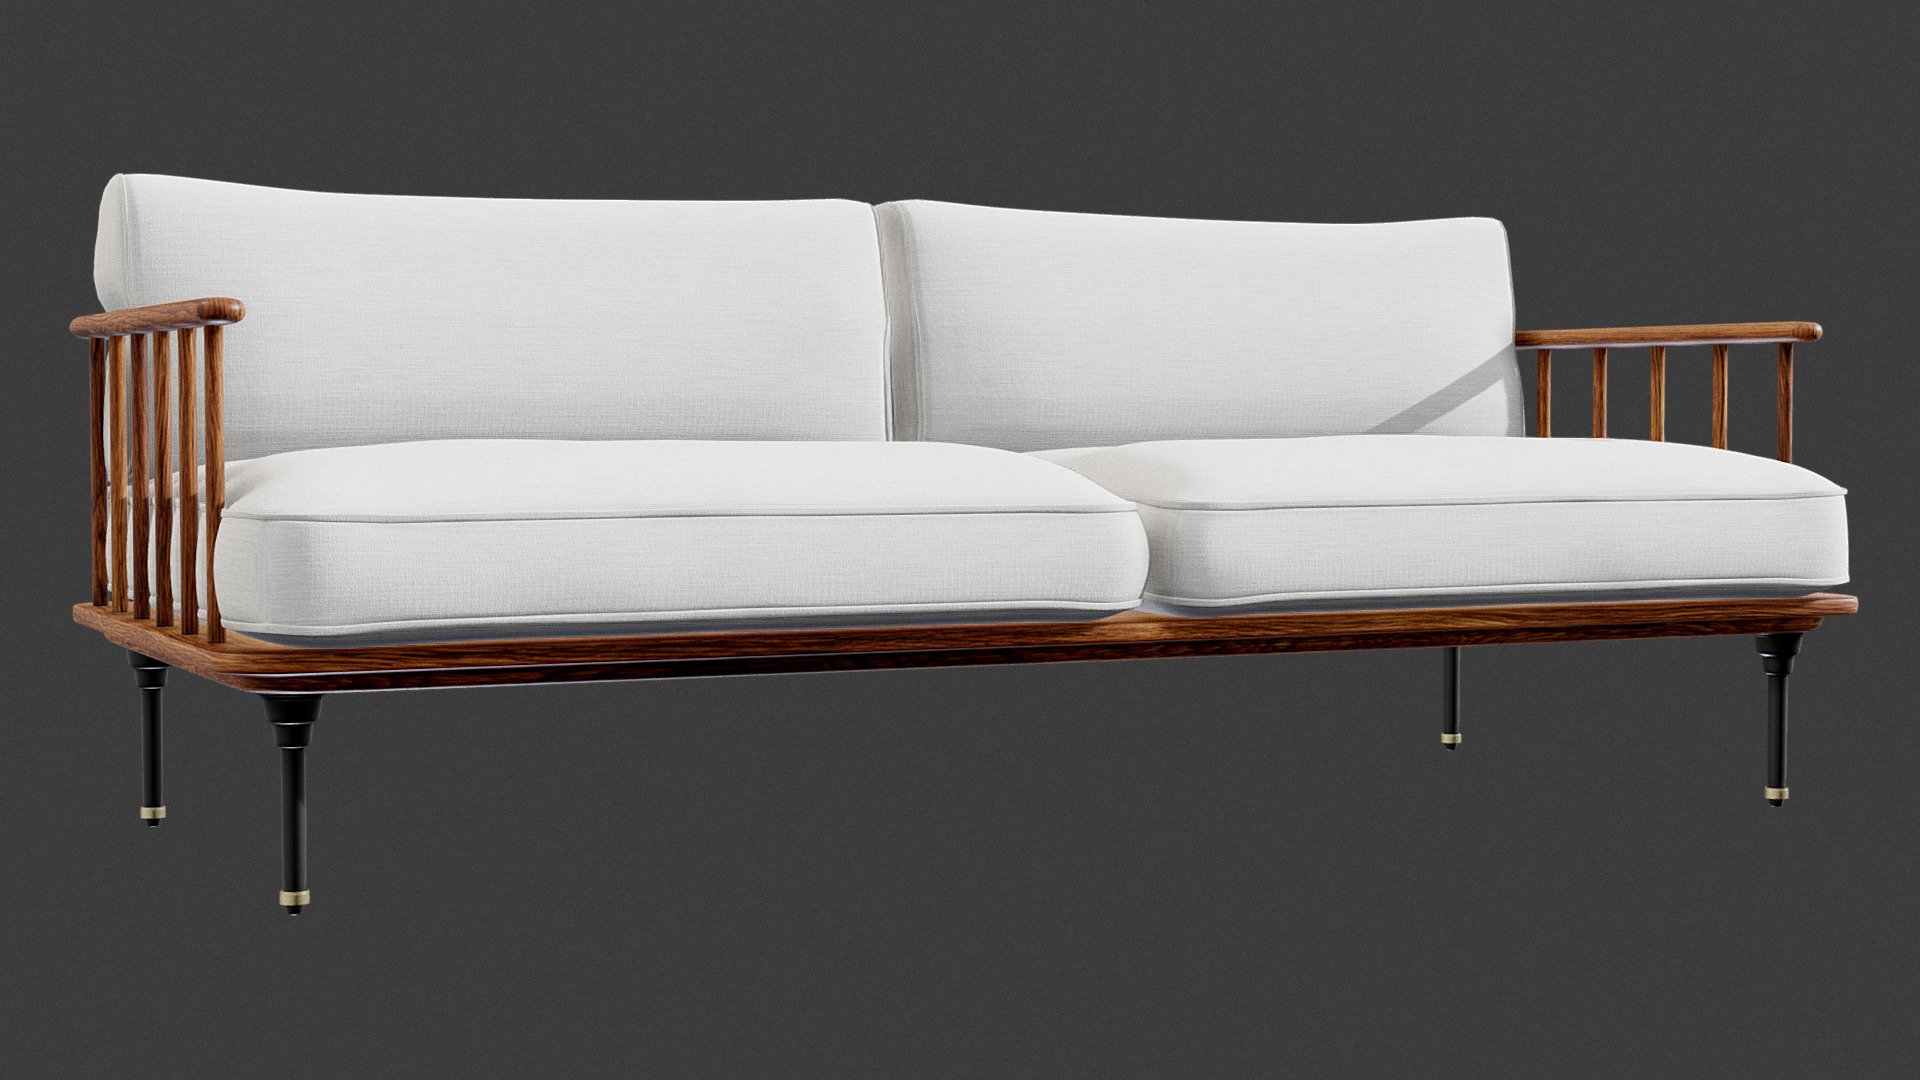 -no plugins/modifiers etc

-model fully UVs unwrapped 

-diffuse texture size: 8192x8192

-model was made in real size

-scene units measurement: millimeters

-dimensions: 76 H x 200.3 W x 87.9 D (cm)
 - Kalmar Sofa - 3D model by TypicCube 3d model